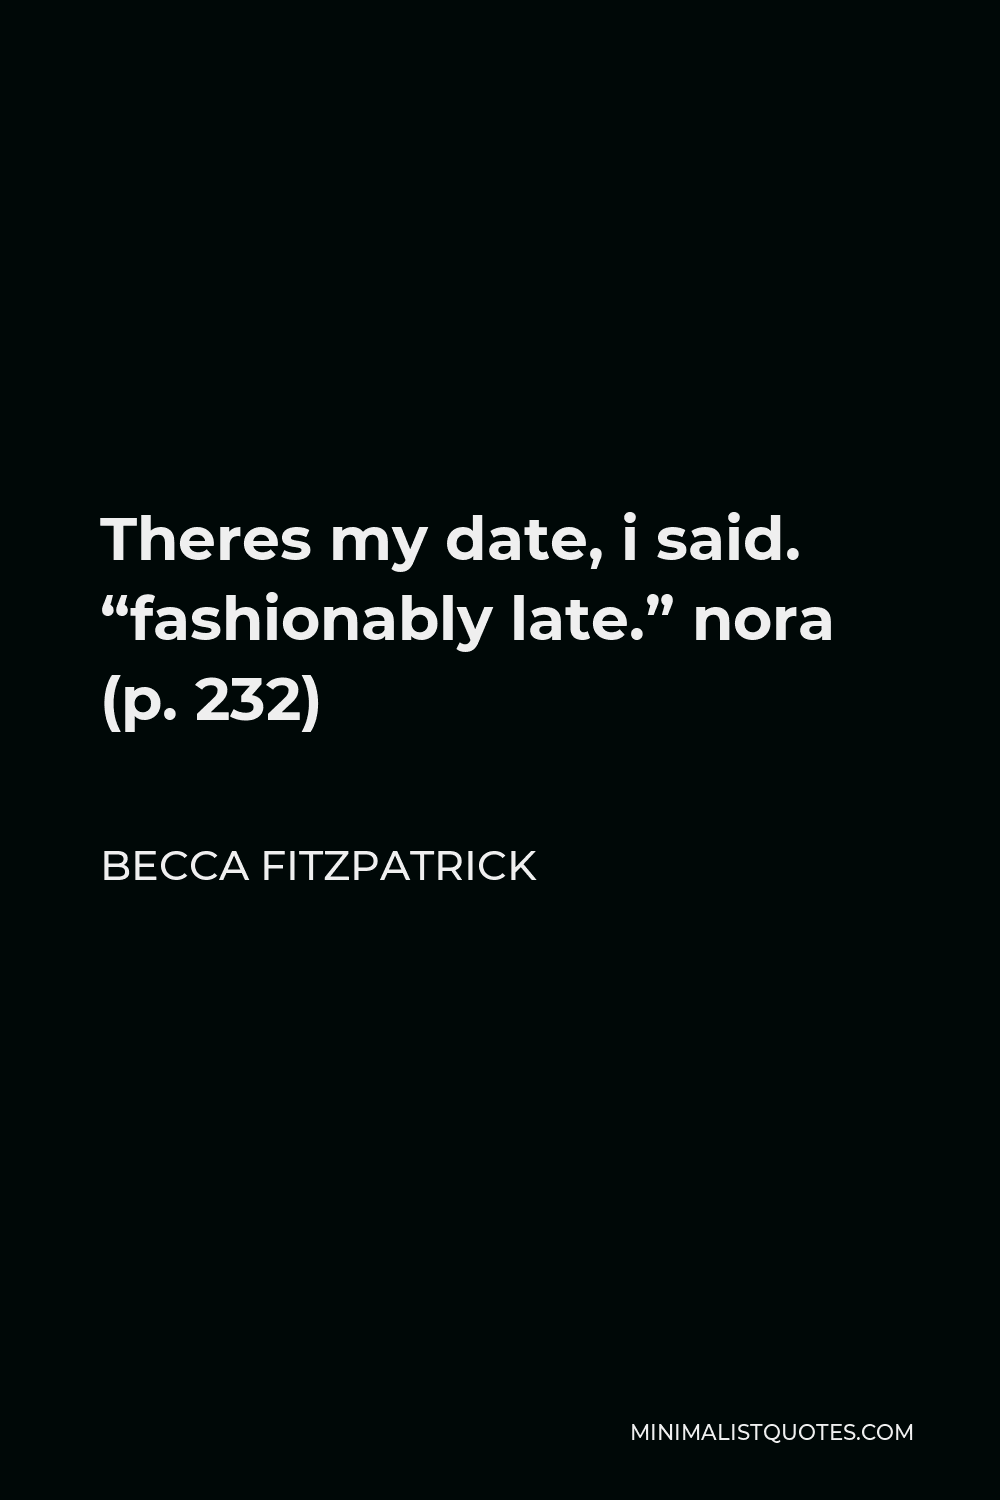 Becca Fitzpatrick Quote - Theres my date, i said. “fashionably late.” nora (p. 232)